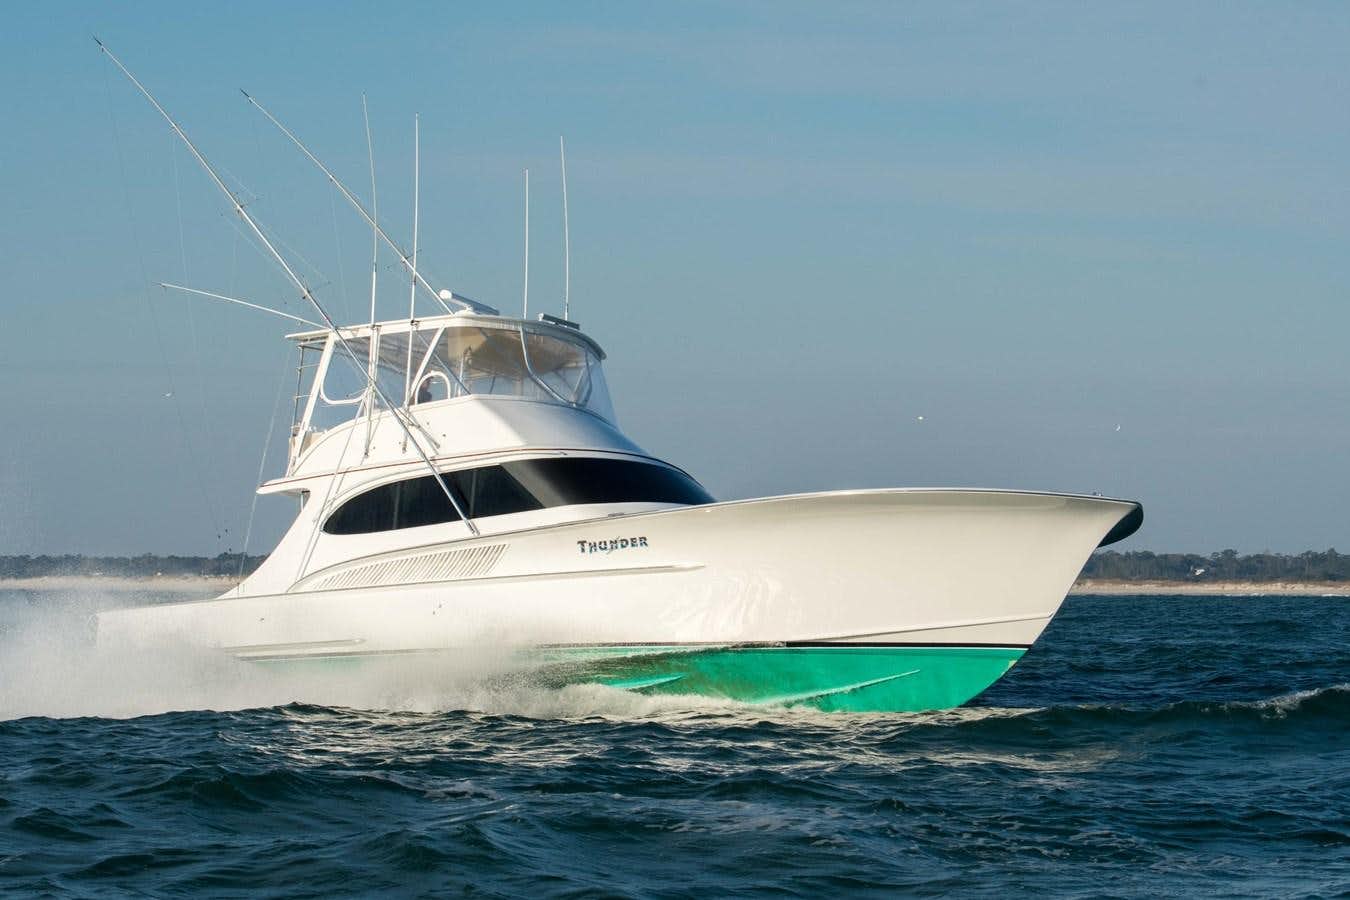 THUNDER Yacht for Sale, 55' (16.84m) 2000 EAST BAY BOAT WORKS